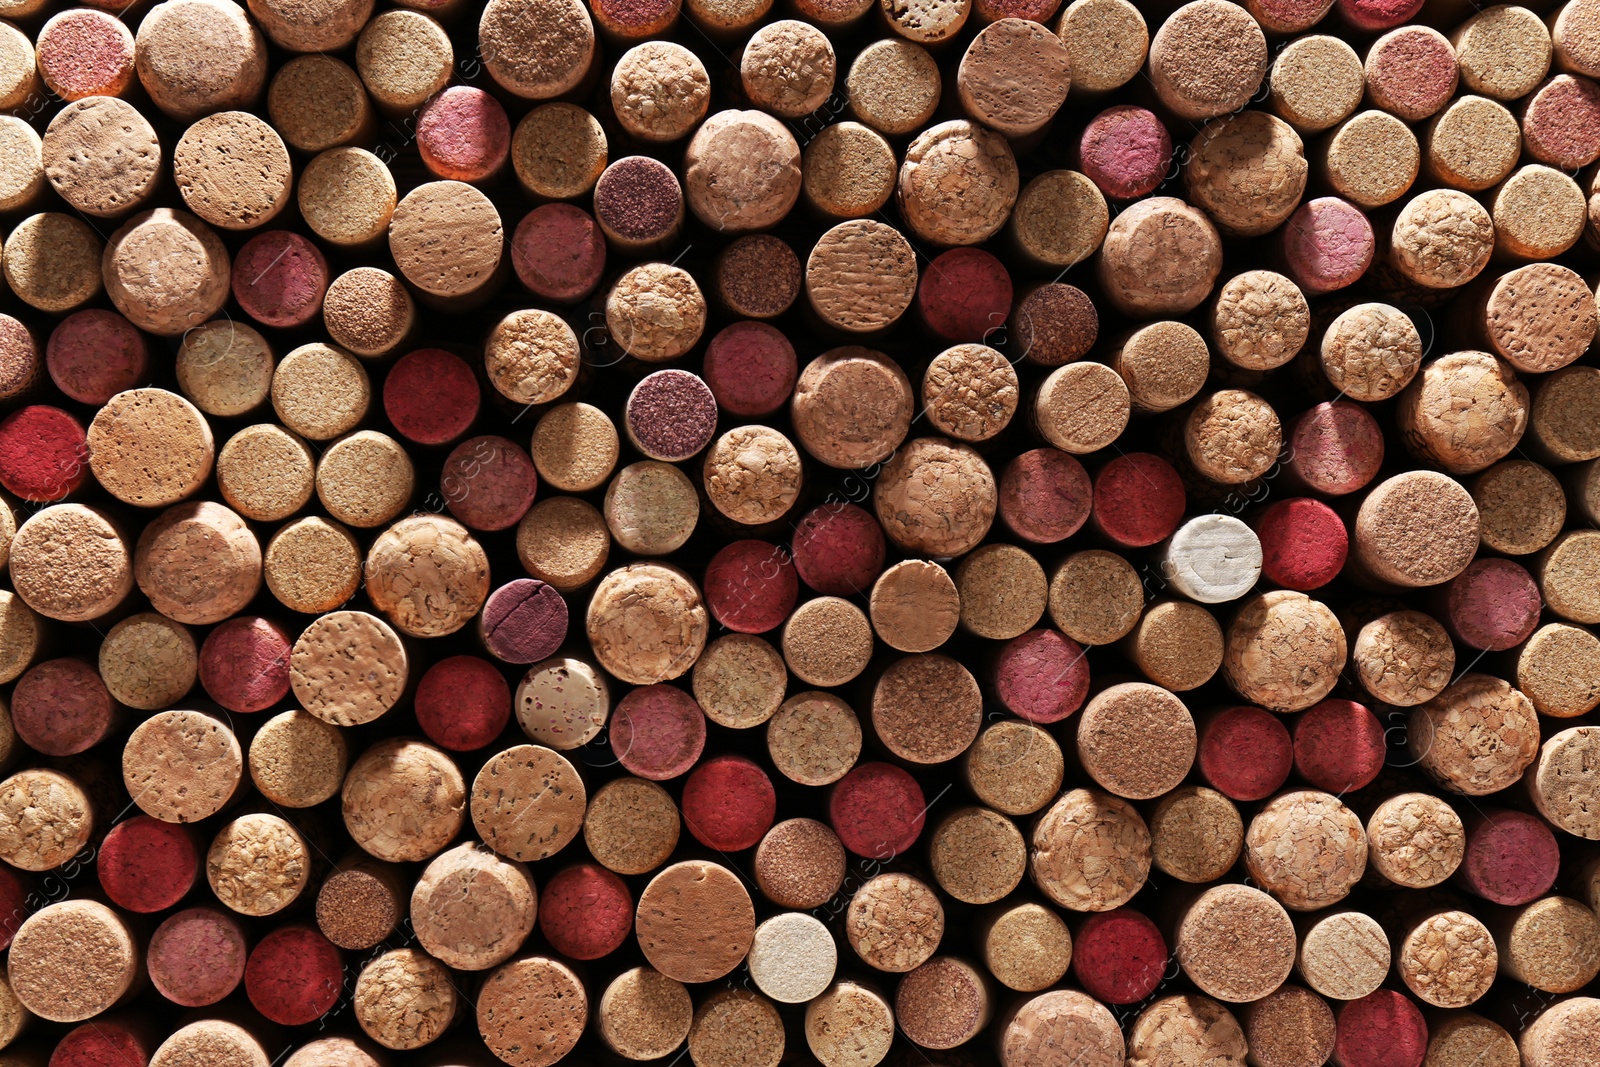 Photo of Many corks of wine bottles as background, top view